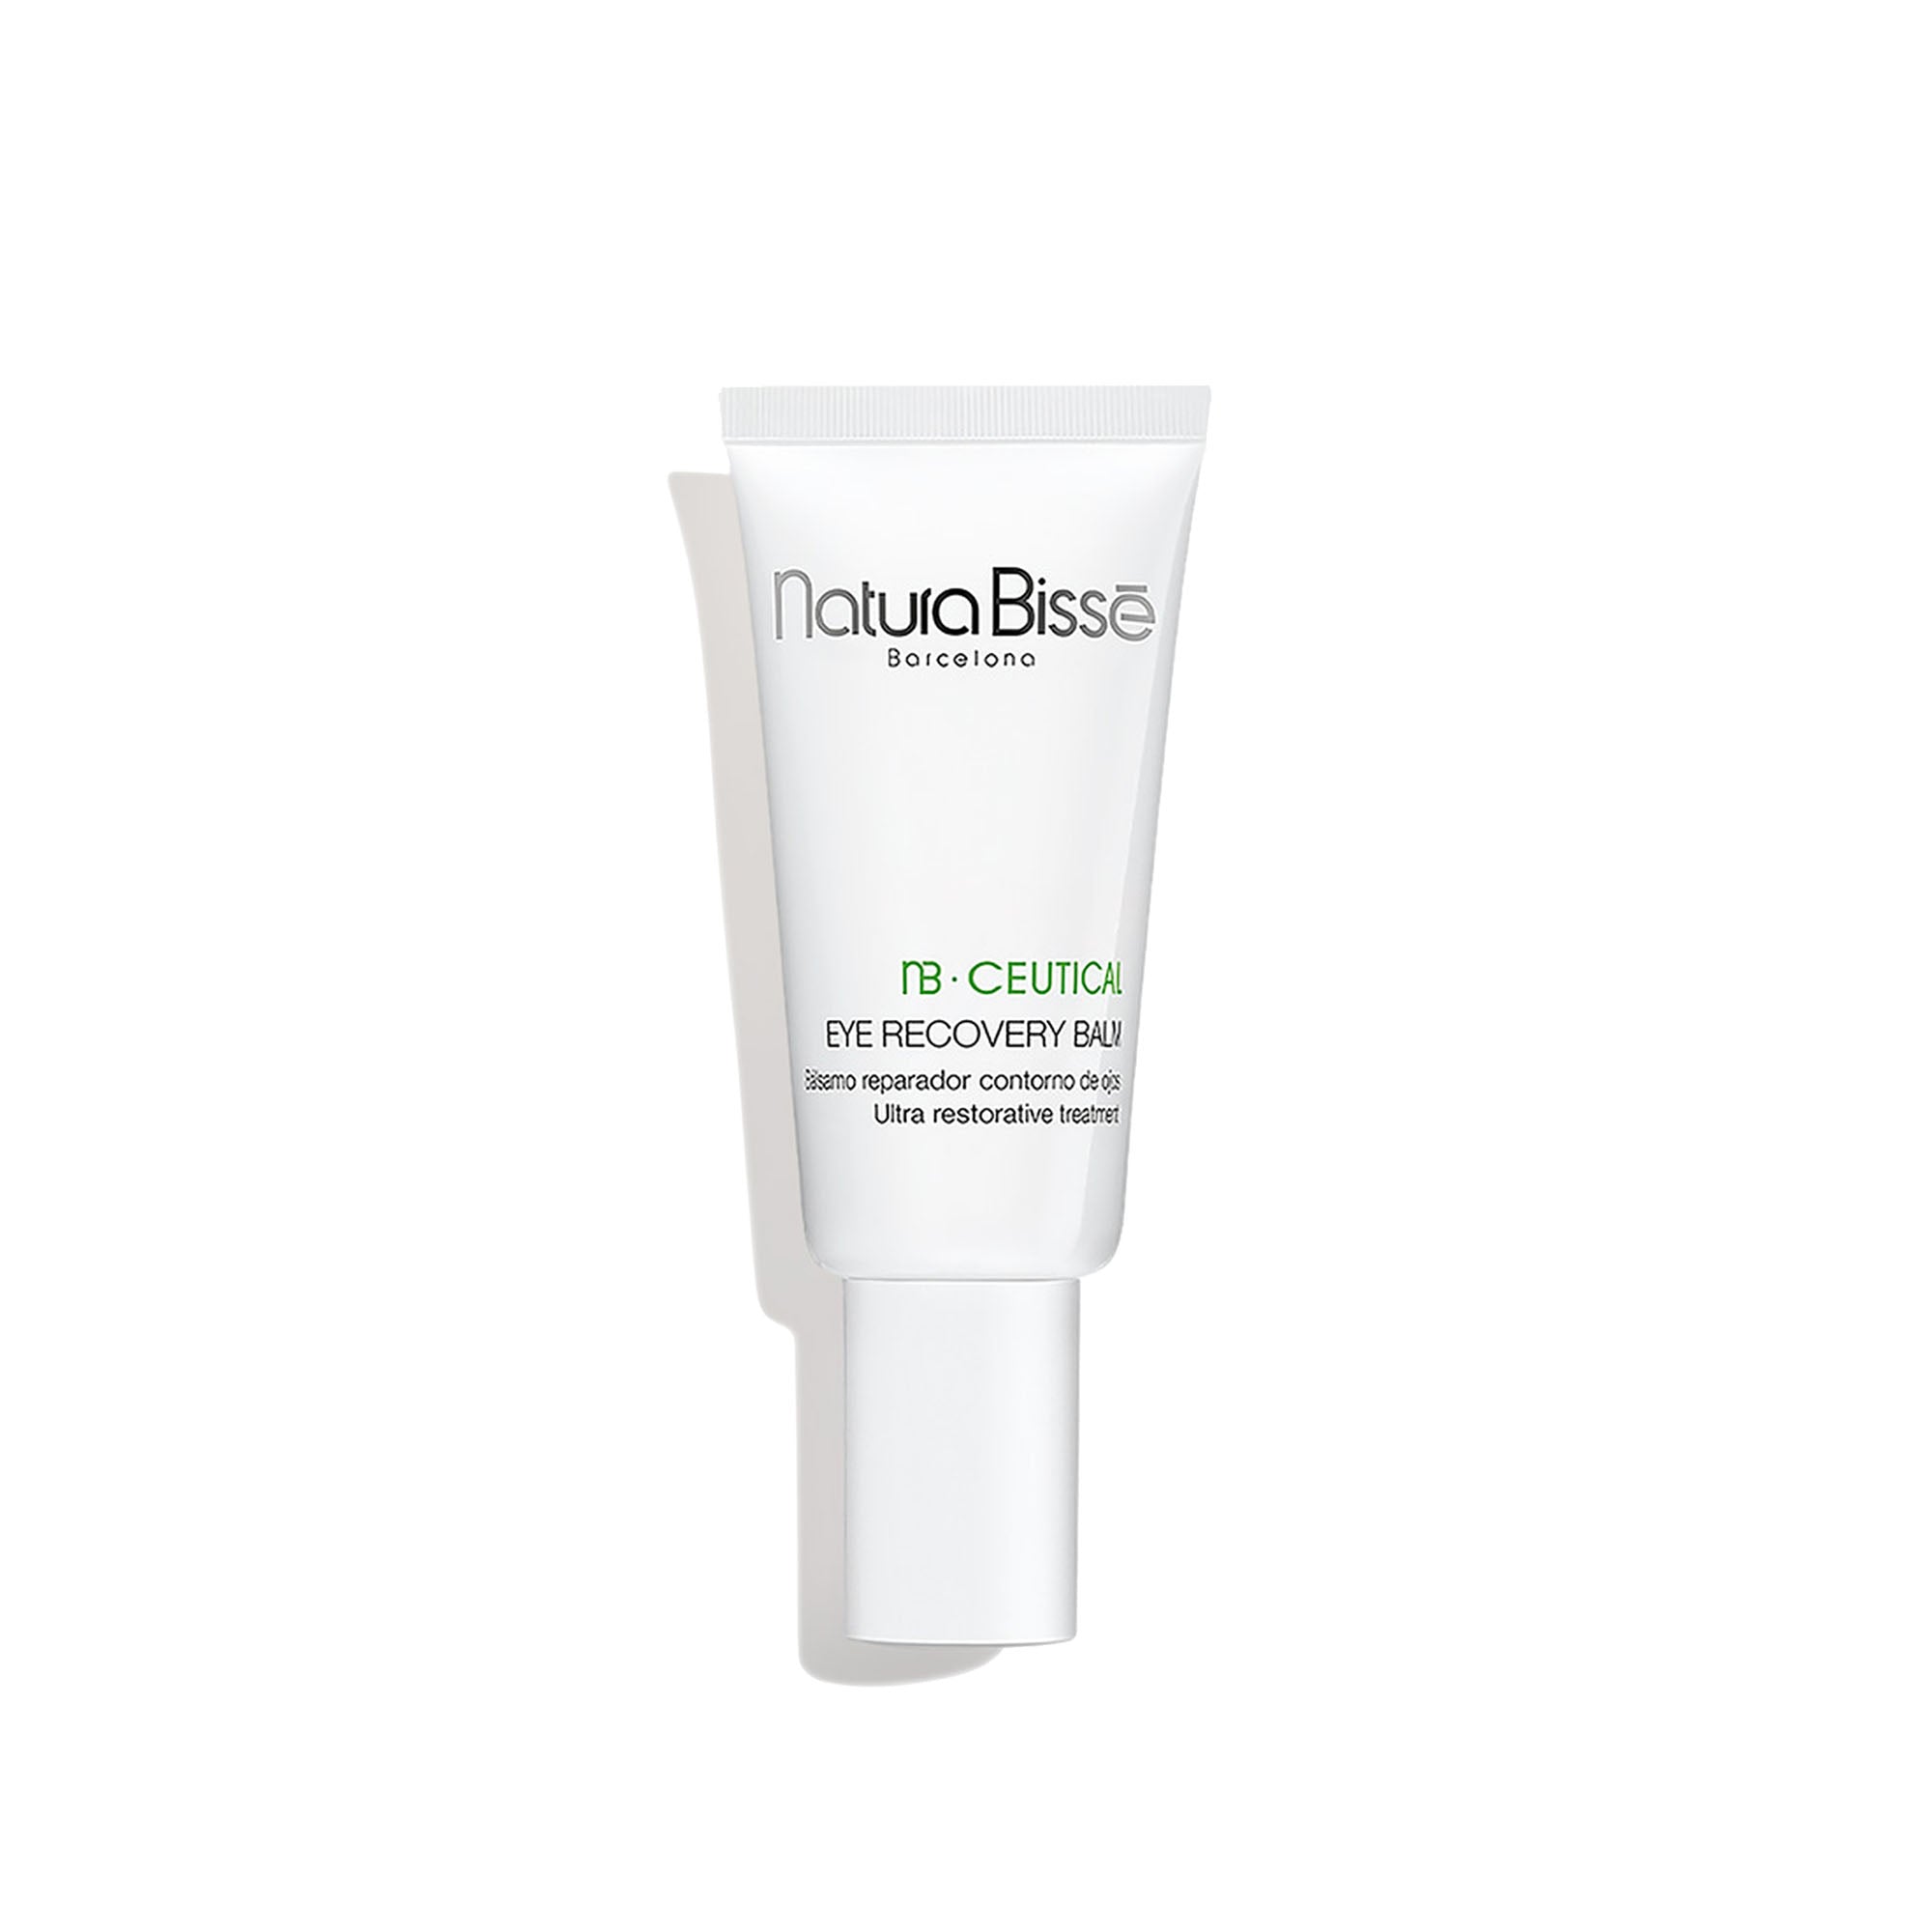 Natura Bisse NB Ceutical Eye Recovery Balm / 0.5OZ